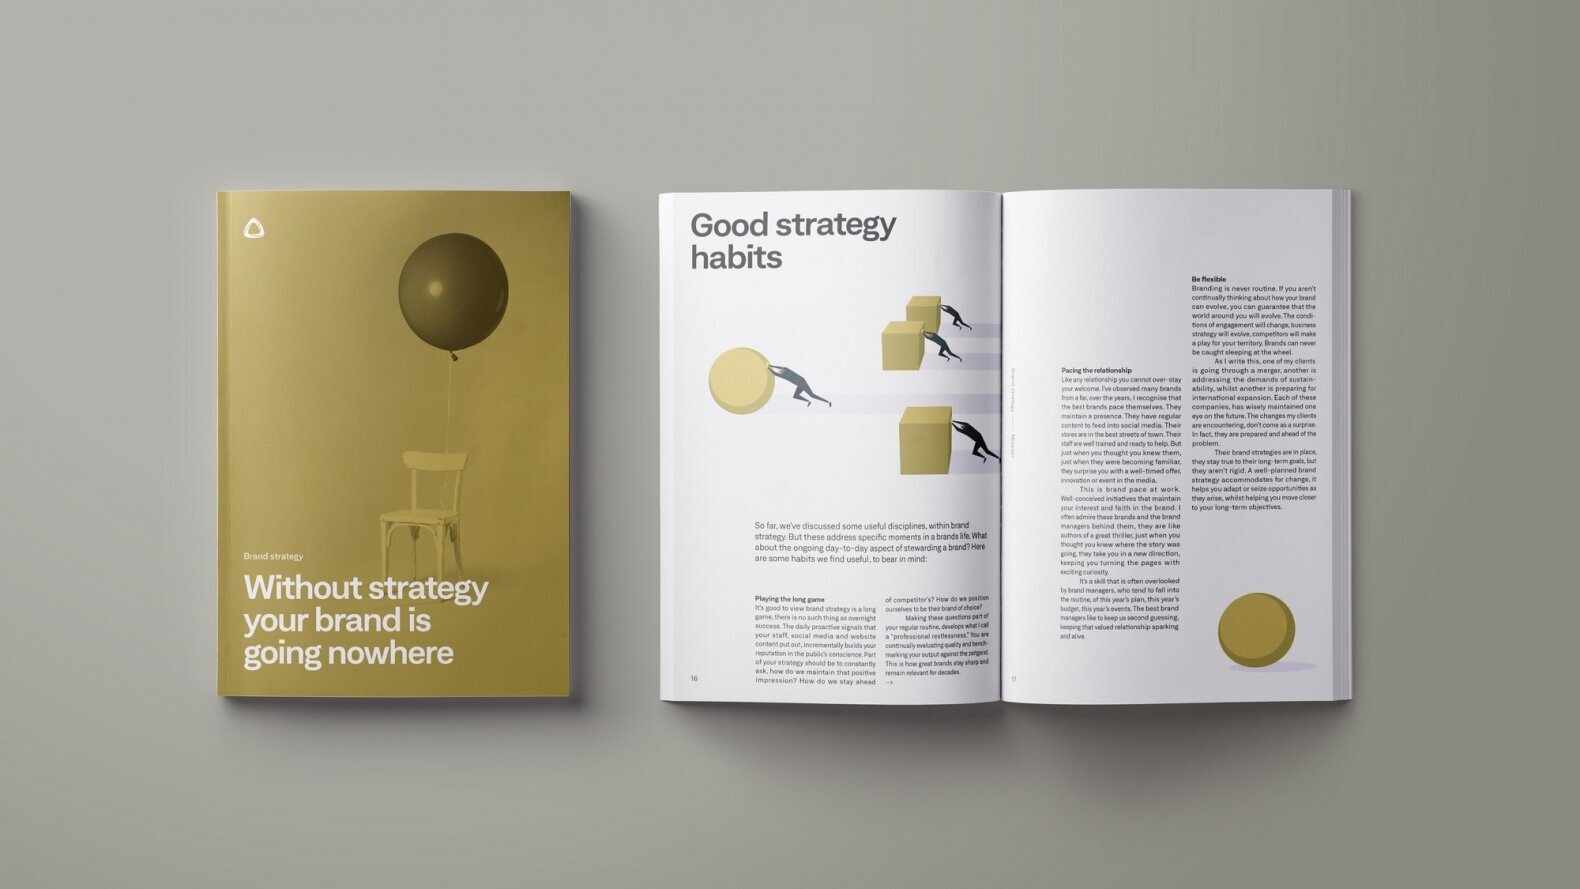 Brand Strategy eBook. Designed as a physical book format.